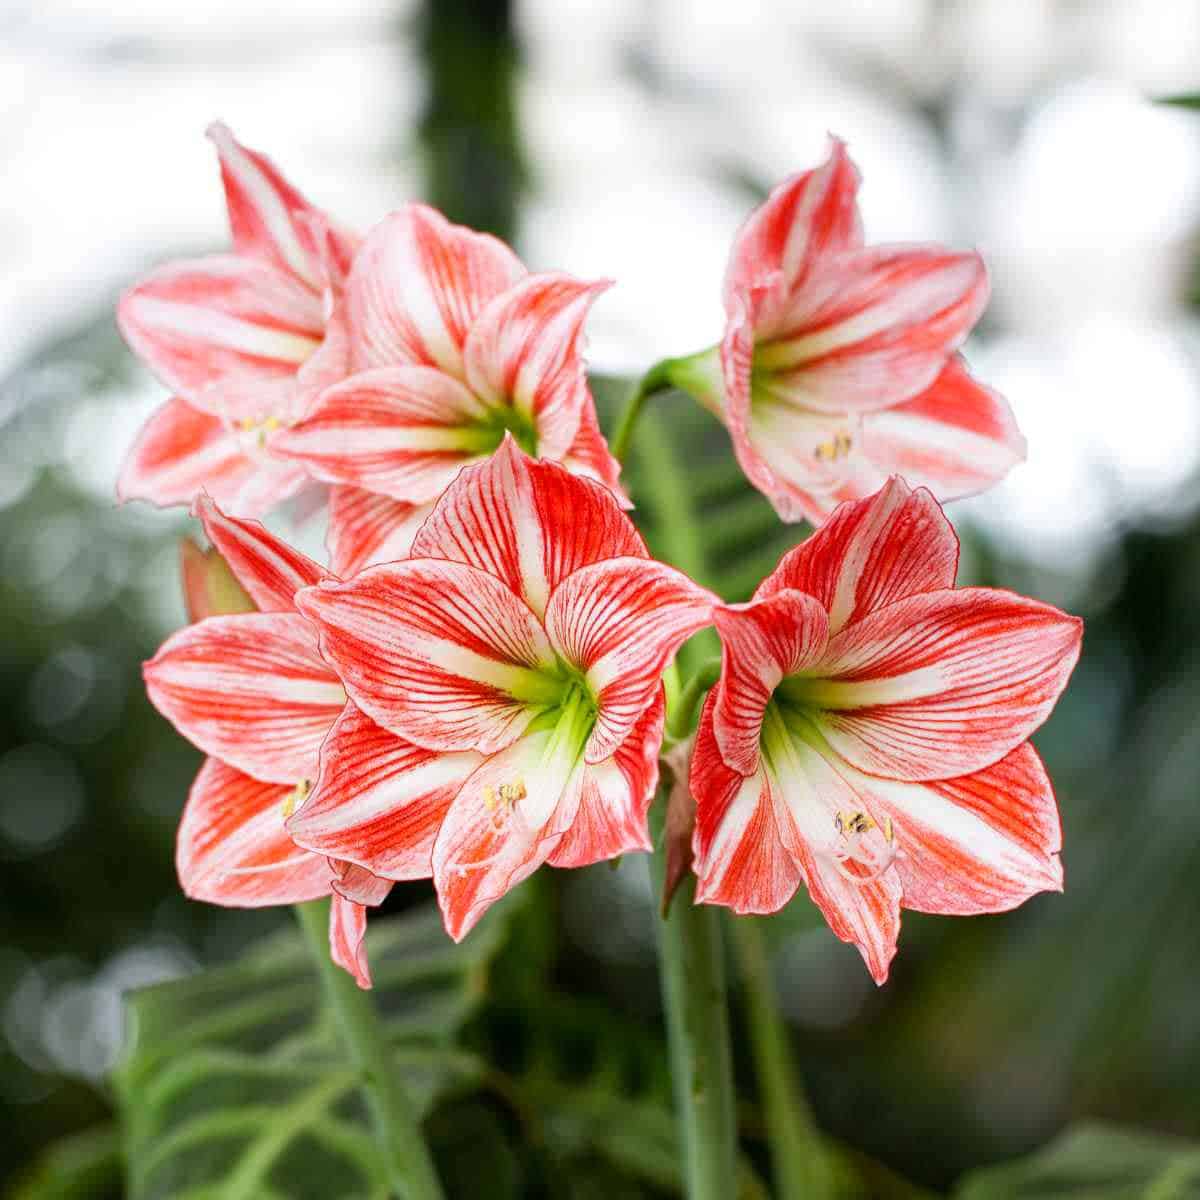 Two blooming amaryllis bulbs with large red and white blossoms are a simple Christmas pleasure.